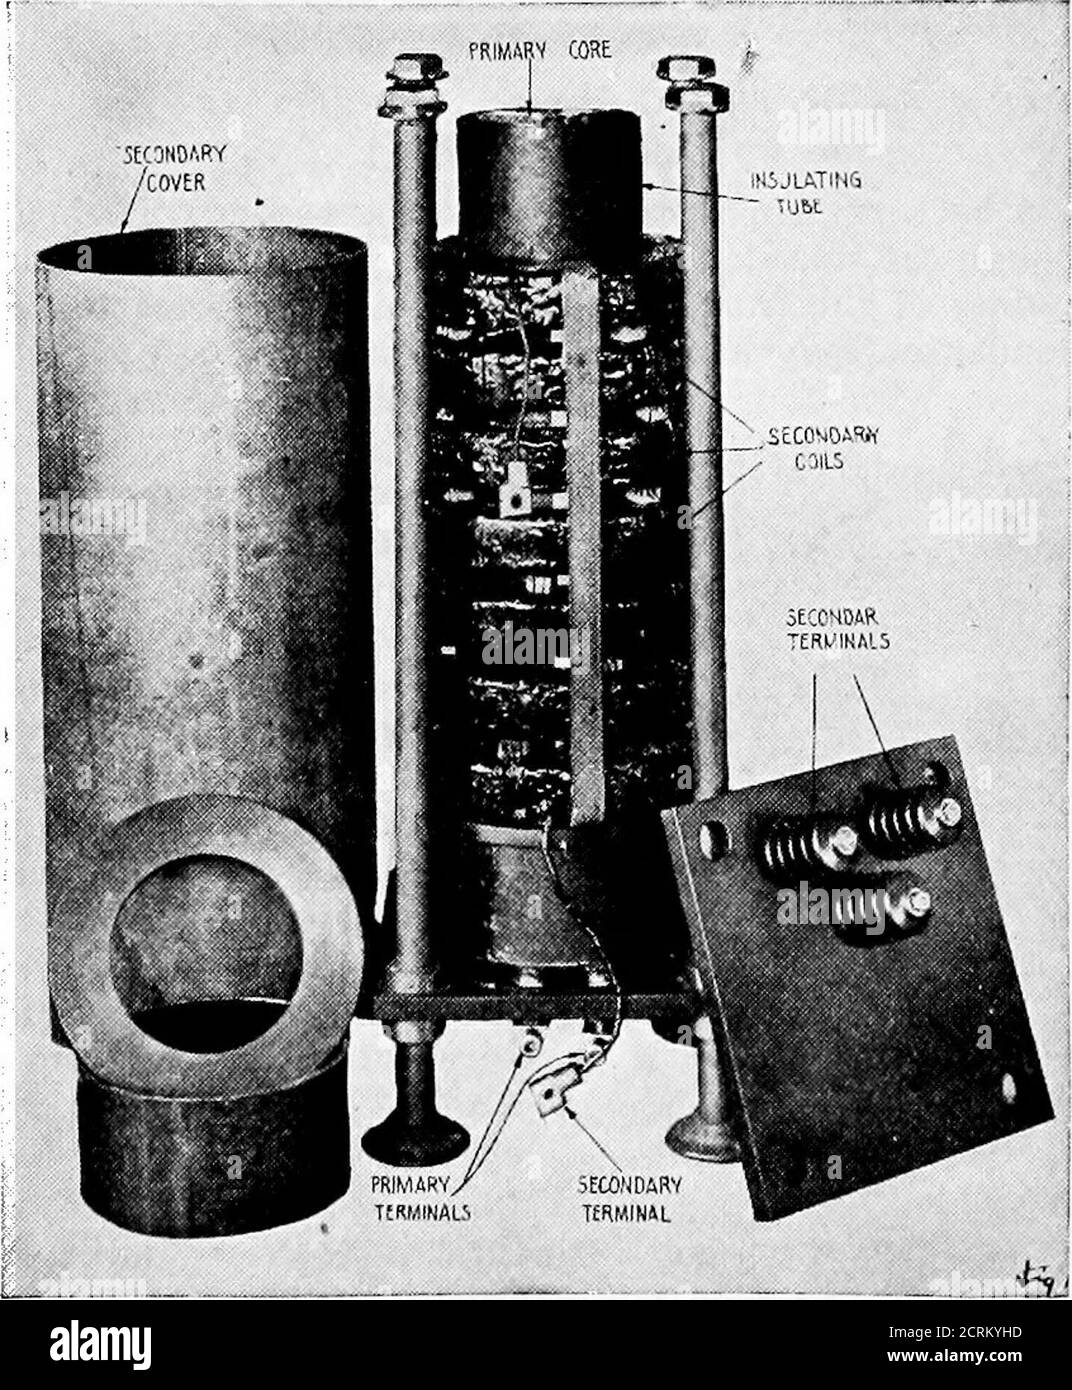 . Practical wireless telegraphy; a complete text book for students of radio communication . 26 to No. 32. Dry insulation is employed and in the larger sizes a blast of air is blownthrough the primary core to keep the transformer cool. The open core transform-ers are designed for primarypotentials from 110 to 500volts and for frequencies from60 to 500 cycles. The sec-ondary potential rarely ex-ceeds 15,000 volts. The transformer shown inFig. 131 is one of the open-core type supplied with the2 K. W. transmitters of theAmerican Marconi Company.The primary core and wind-ing are inserted in a Micar Stock Photo